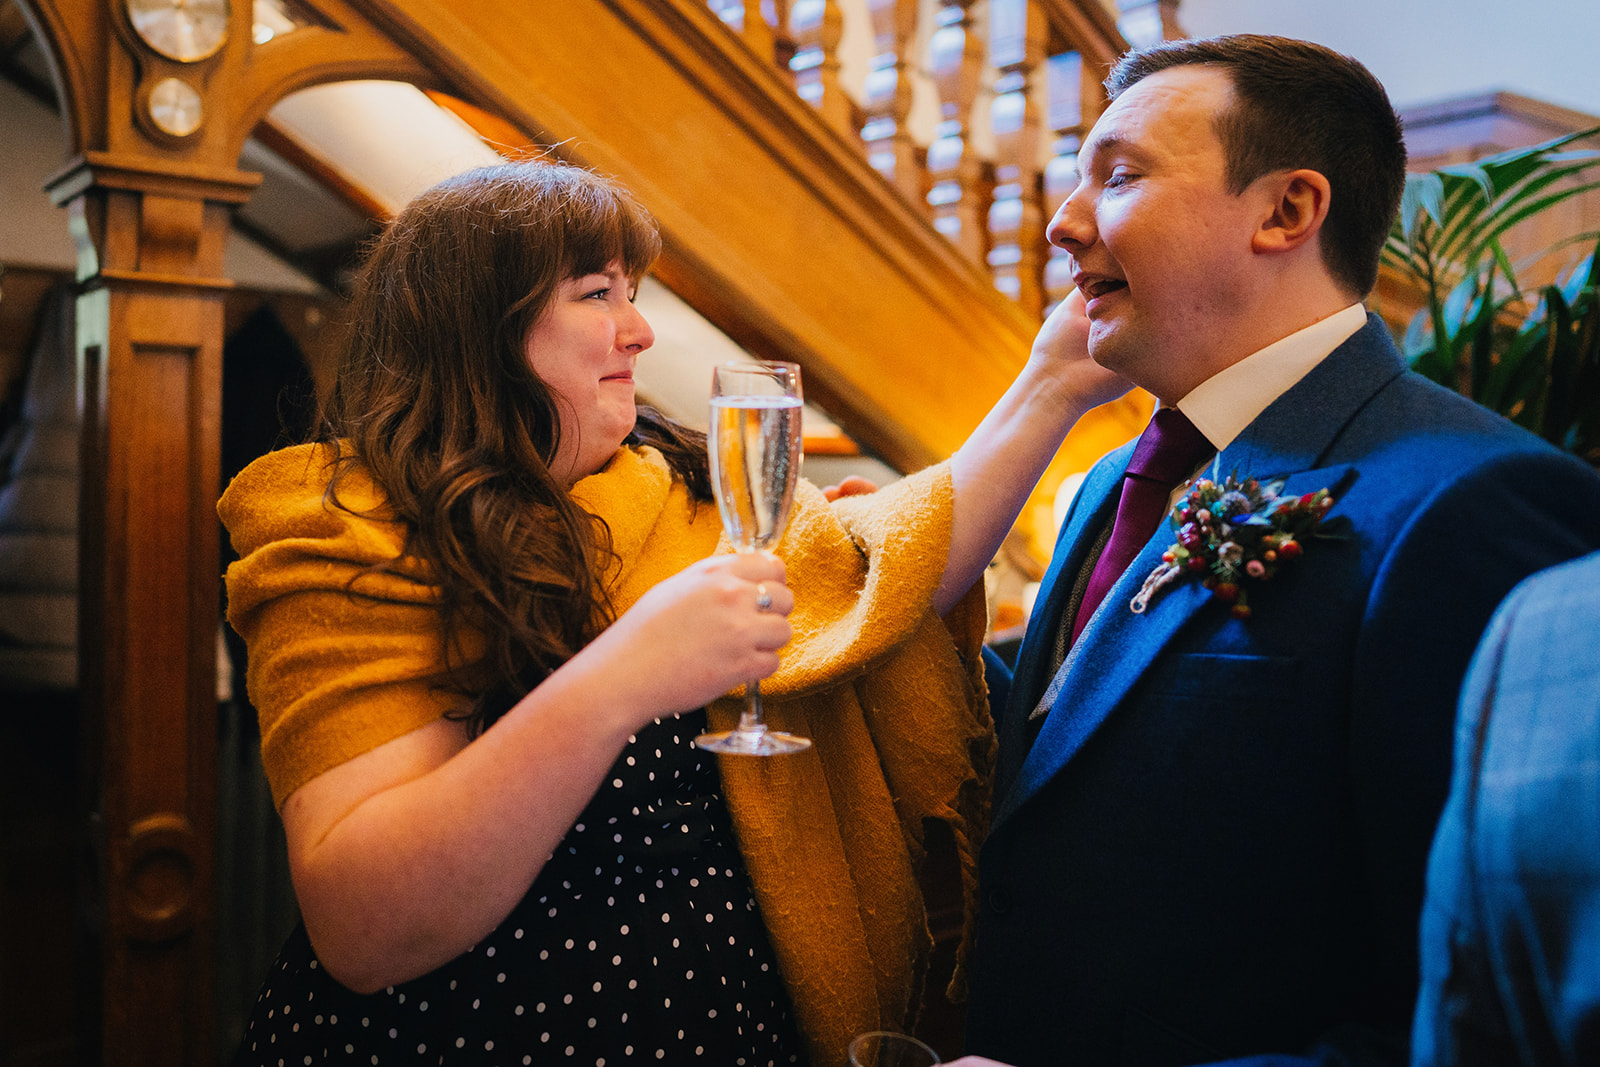 a wedding guest holds a glass of champagne and touches the grooms face, they both look emotional